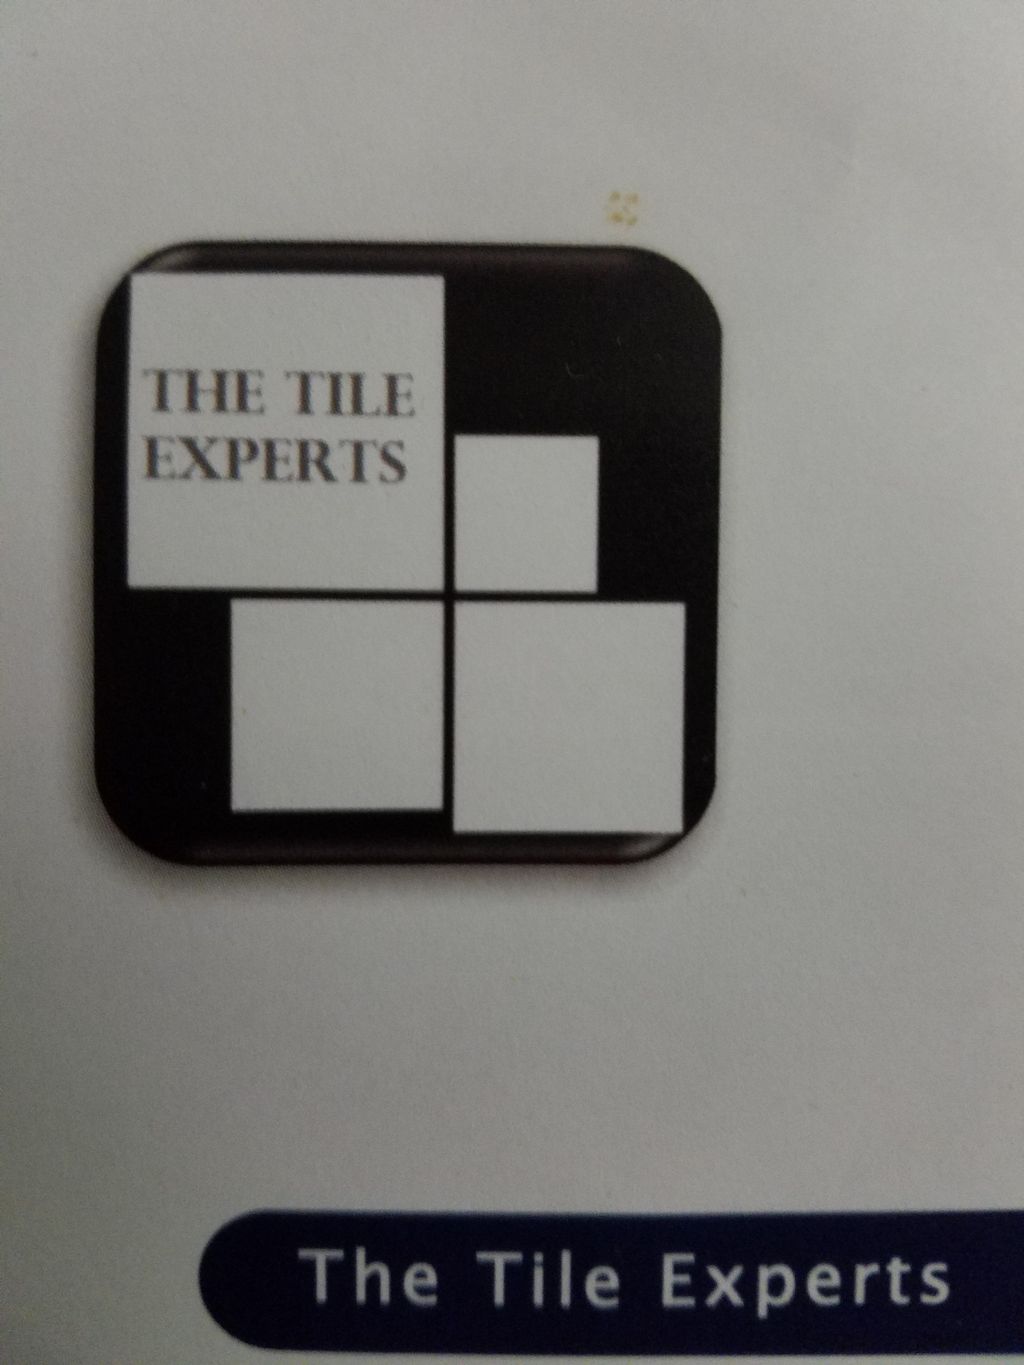 The Pool Tile experts